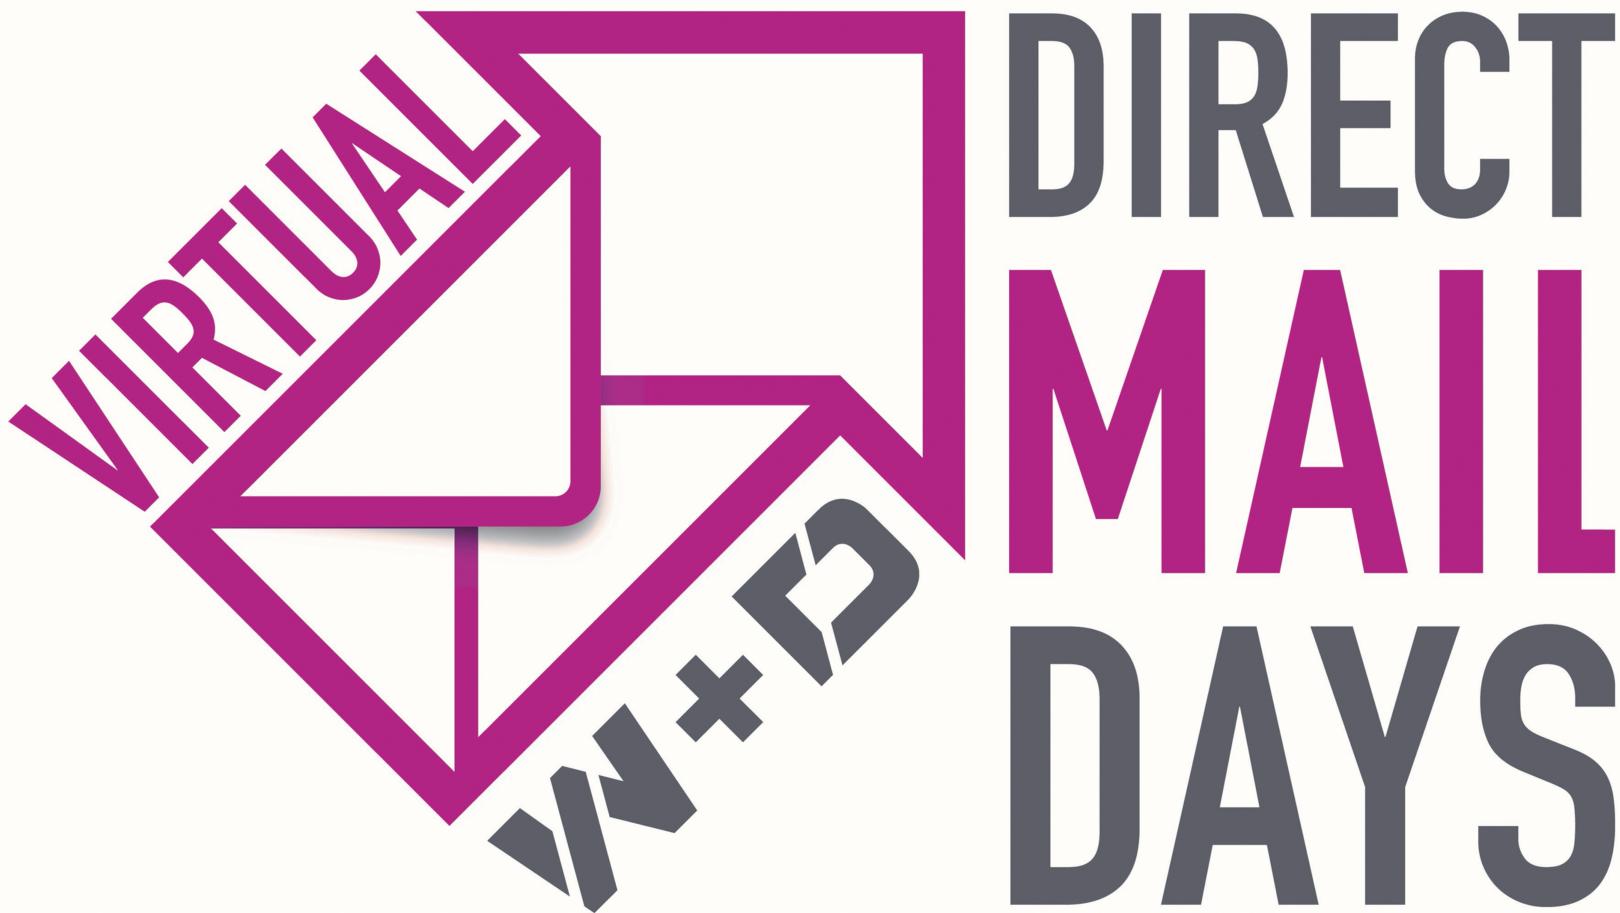 W+D to show its NEW technology running at Virtual W+D Direct Mail Days event - November 18th - Register to Attend  Today !, W+D North America